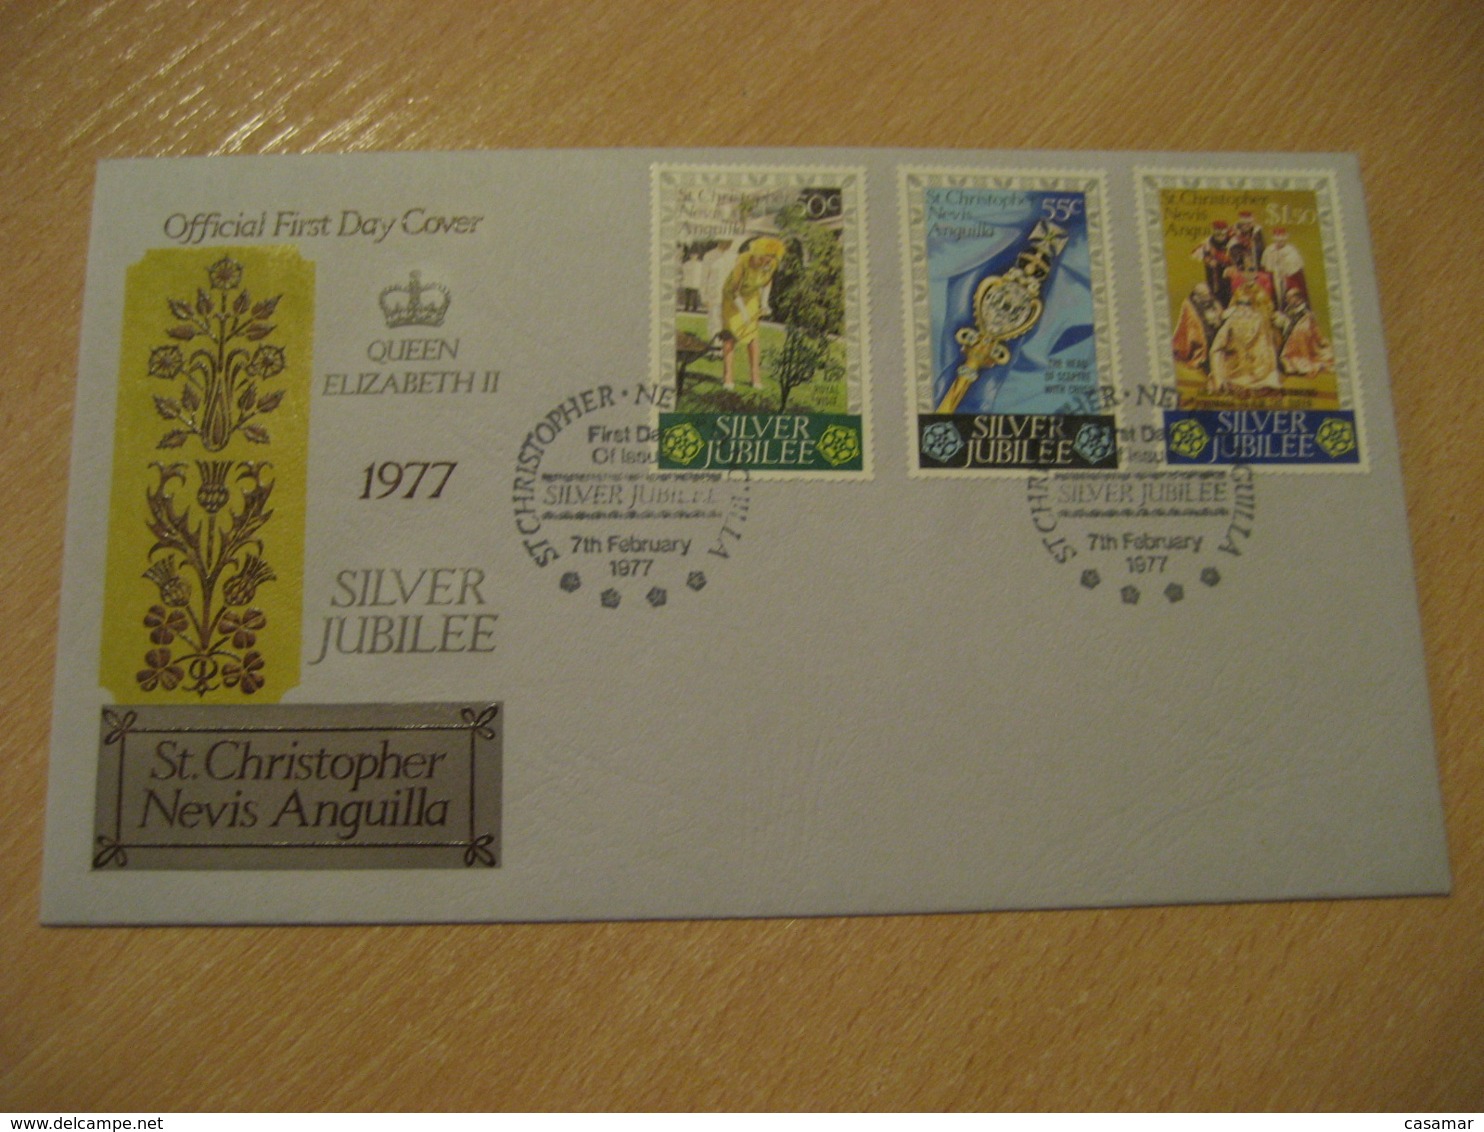 ANGUILLA ST. CHRISTOPHER NEVIS 1977 QEII Silver Jubilee Set Stamp FDC Cancel Cover British Area West Indies - Anguilla (1968-...)